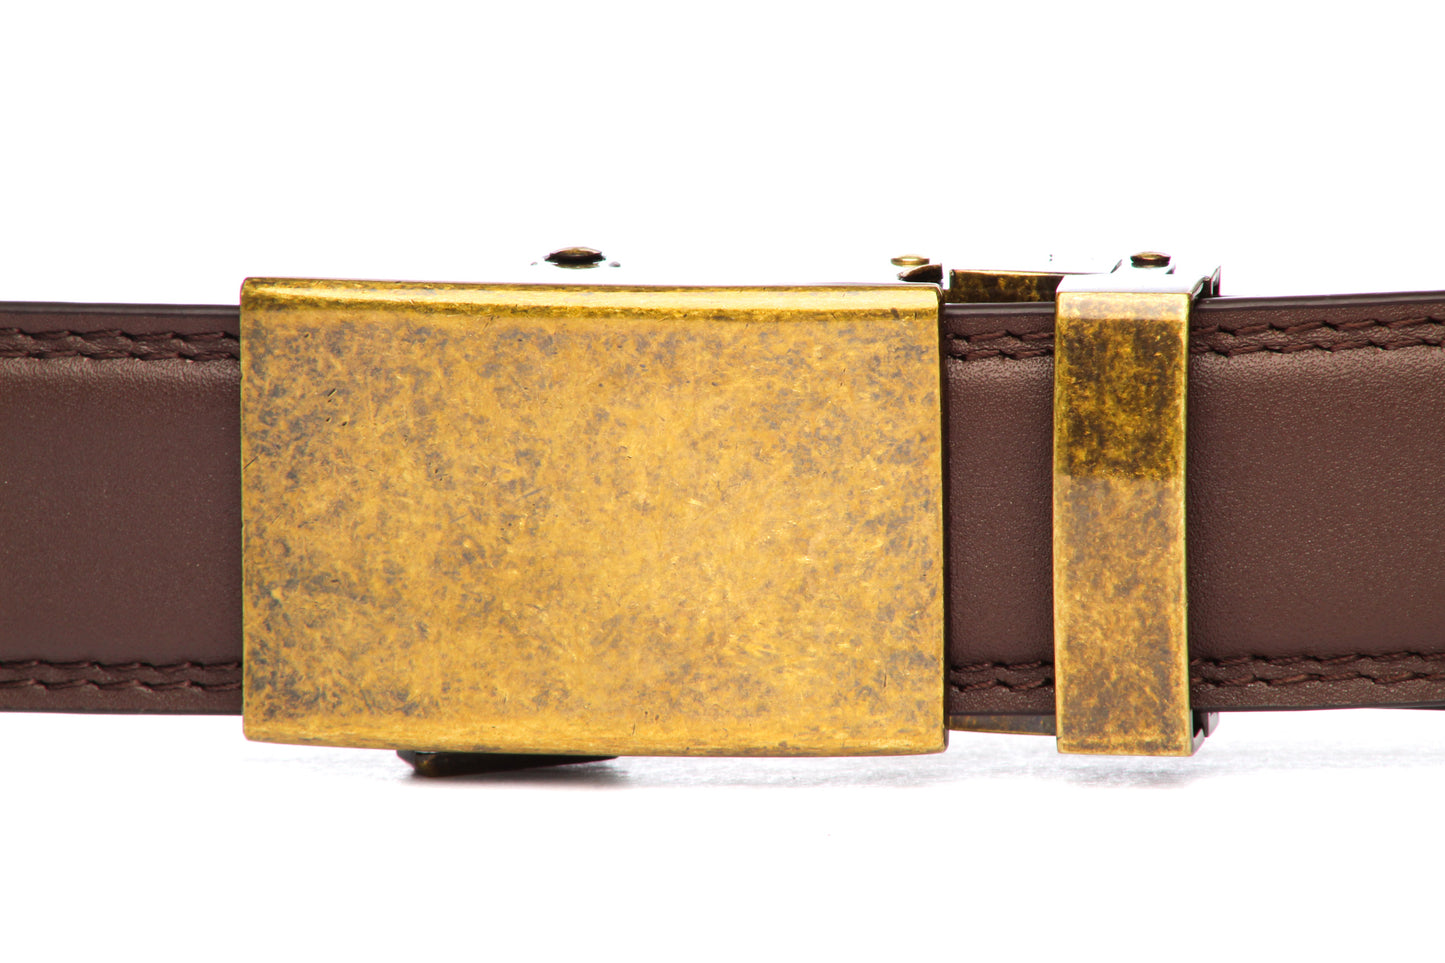 Men's classic ratchet belt buckle in antiqued gold with a 1.25-inch width, front view.